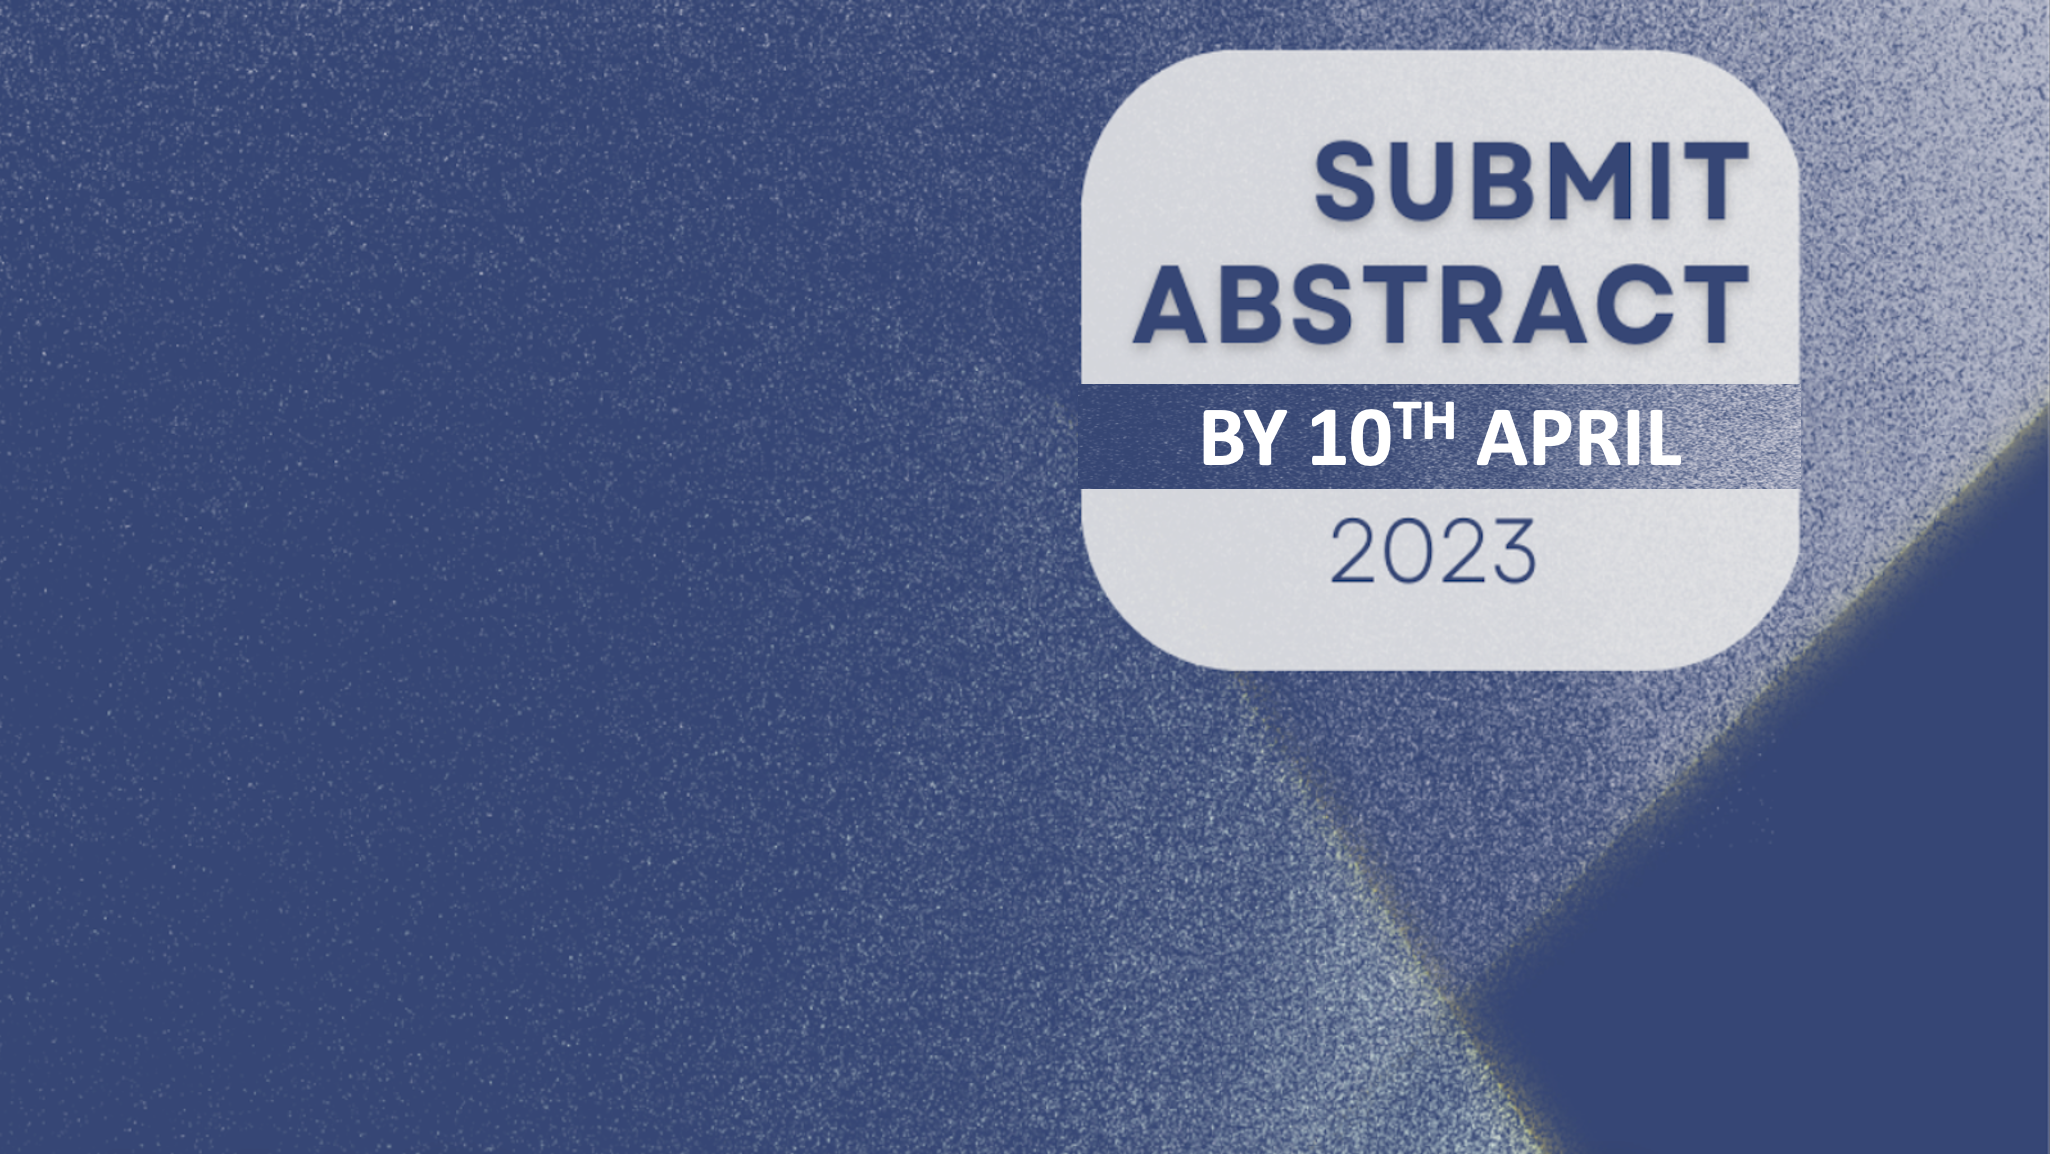 Background image with button stating Submit Abstract by 10th April 2023